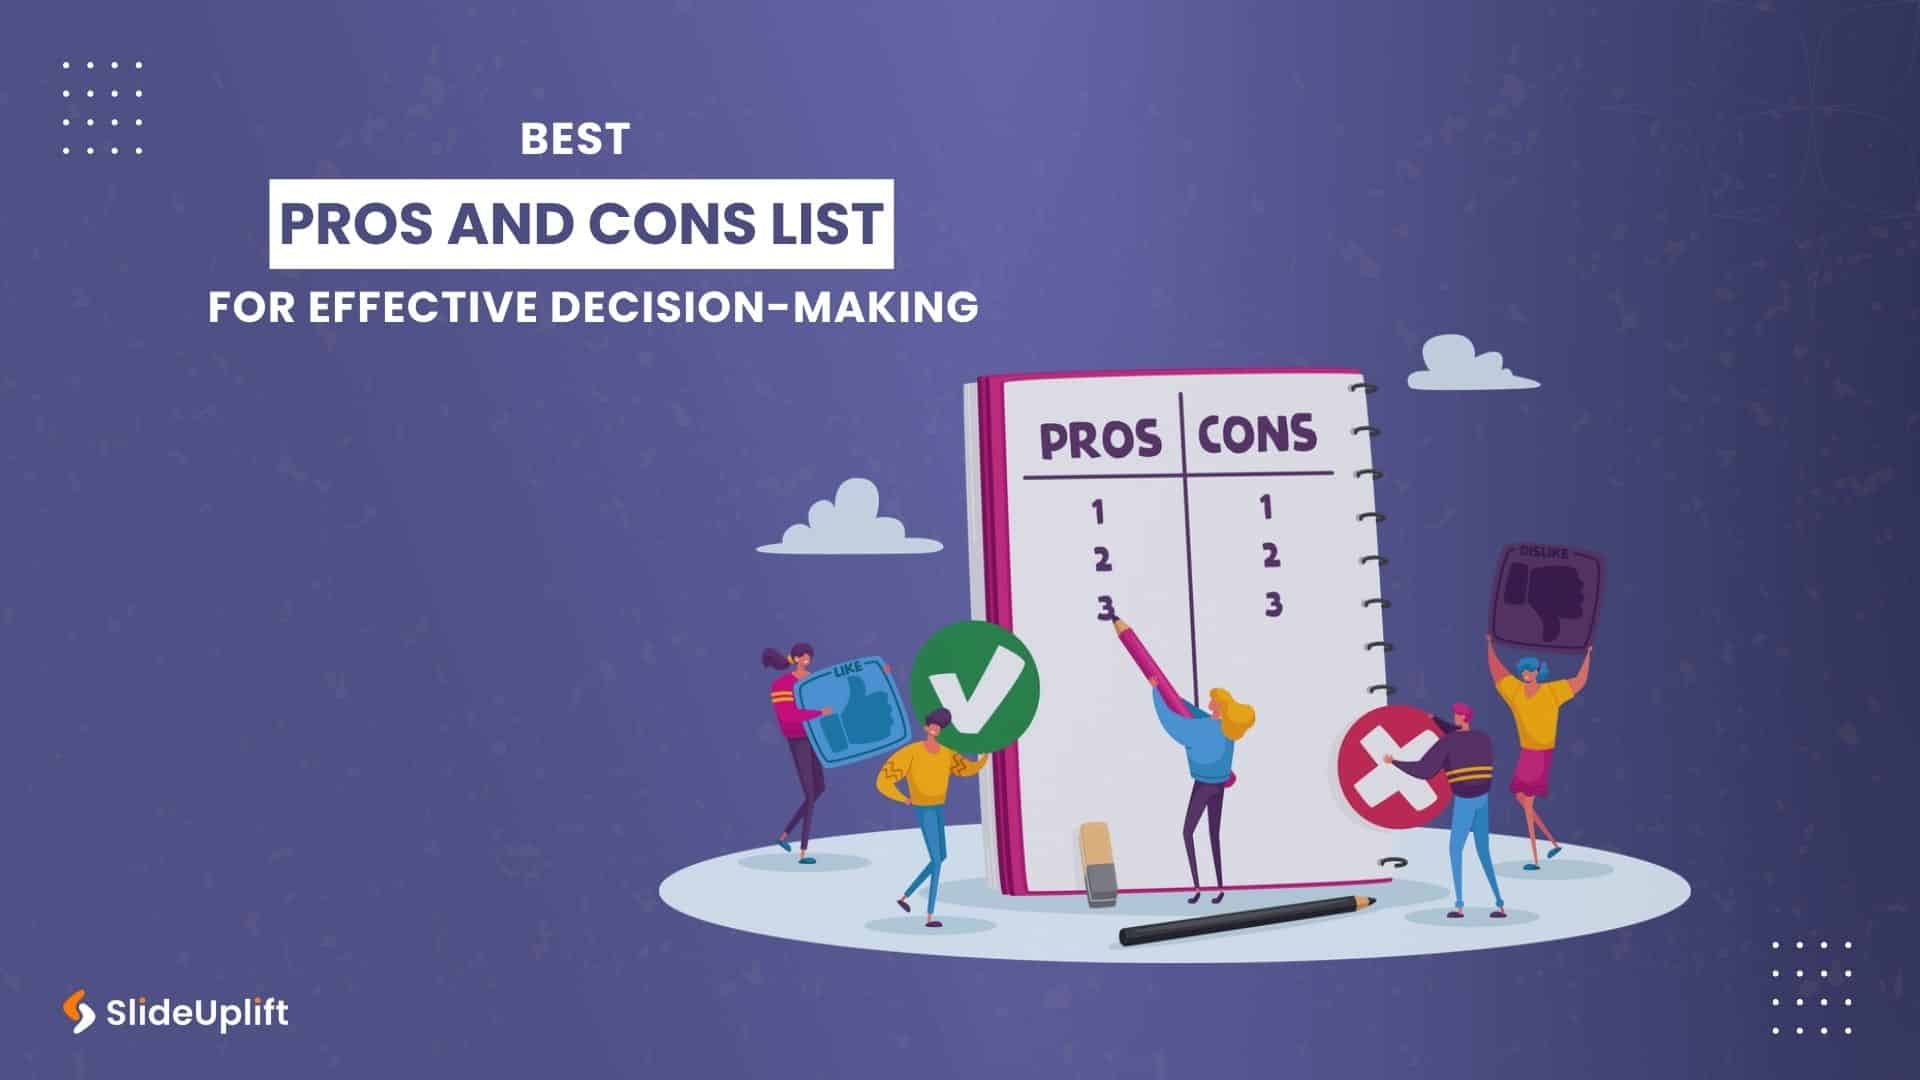 Best Pros And Cons List For Effective Decision-Making